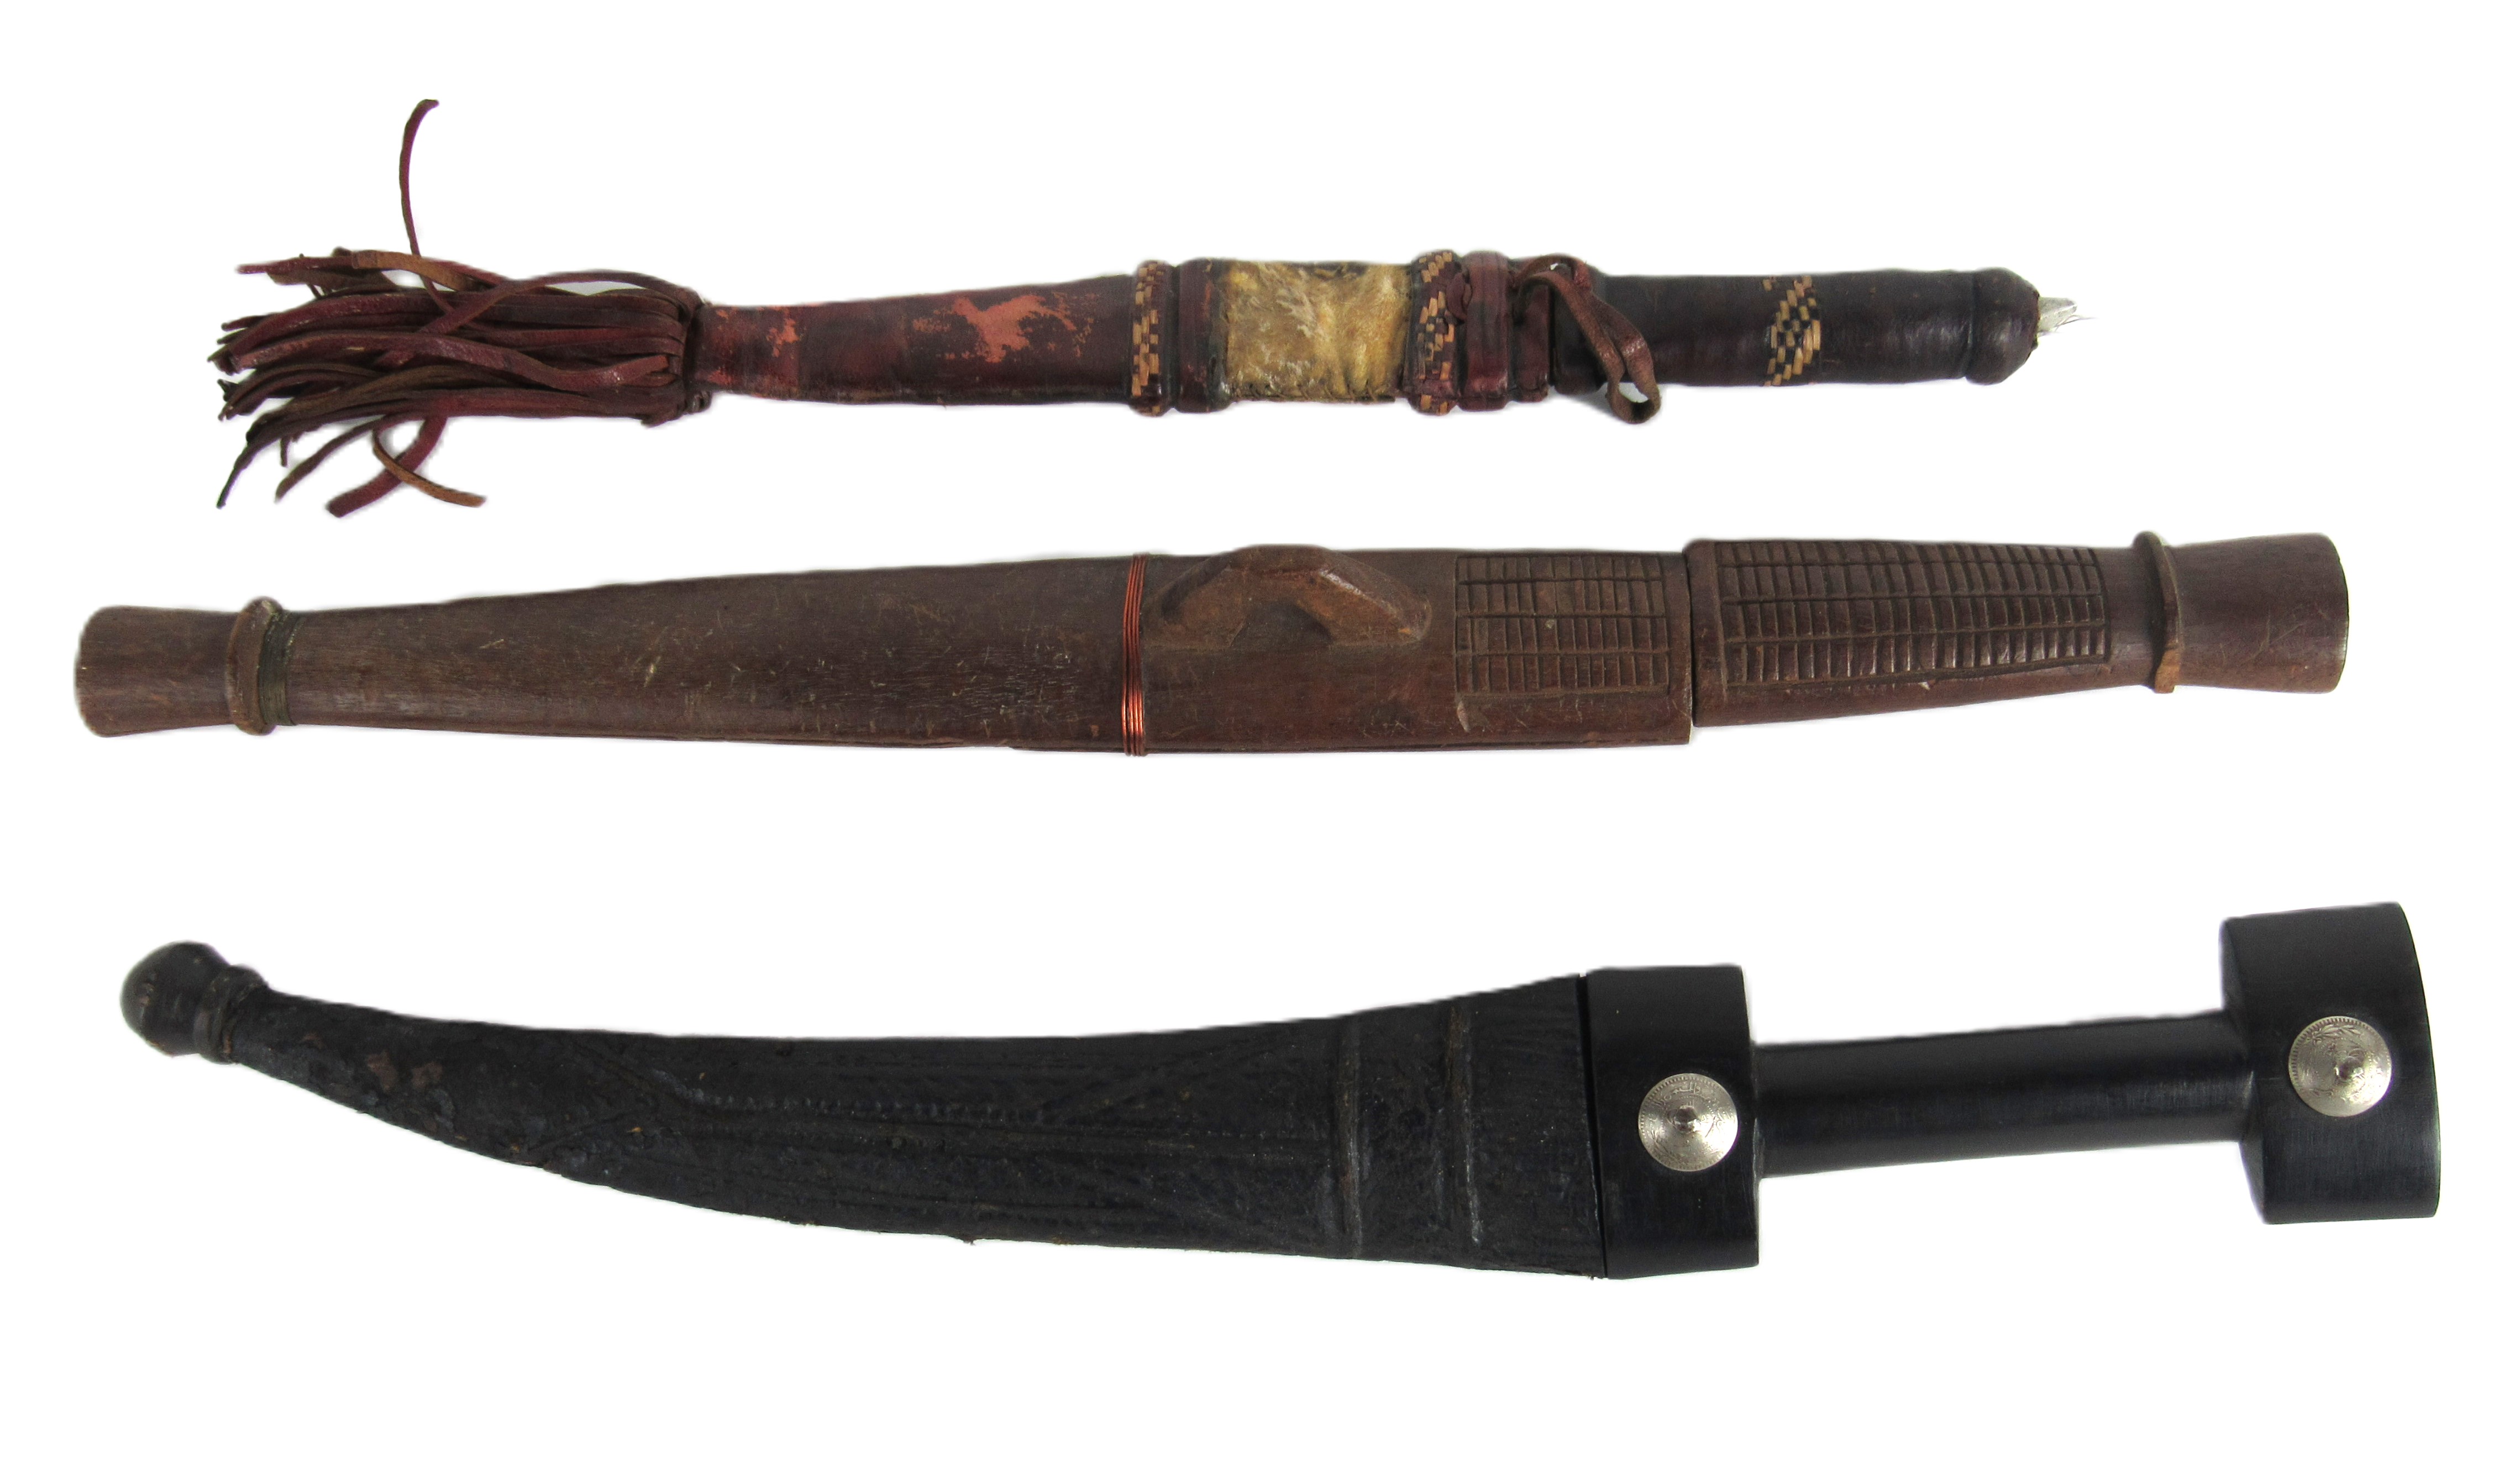 Militaria: Ethnographical - A 19th Century Persian 'Jambiya' the double sided and curved blade